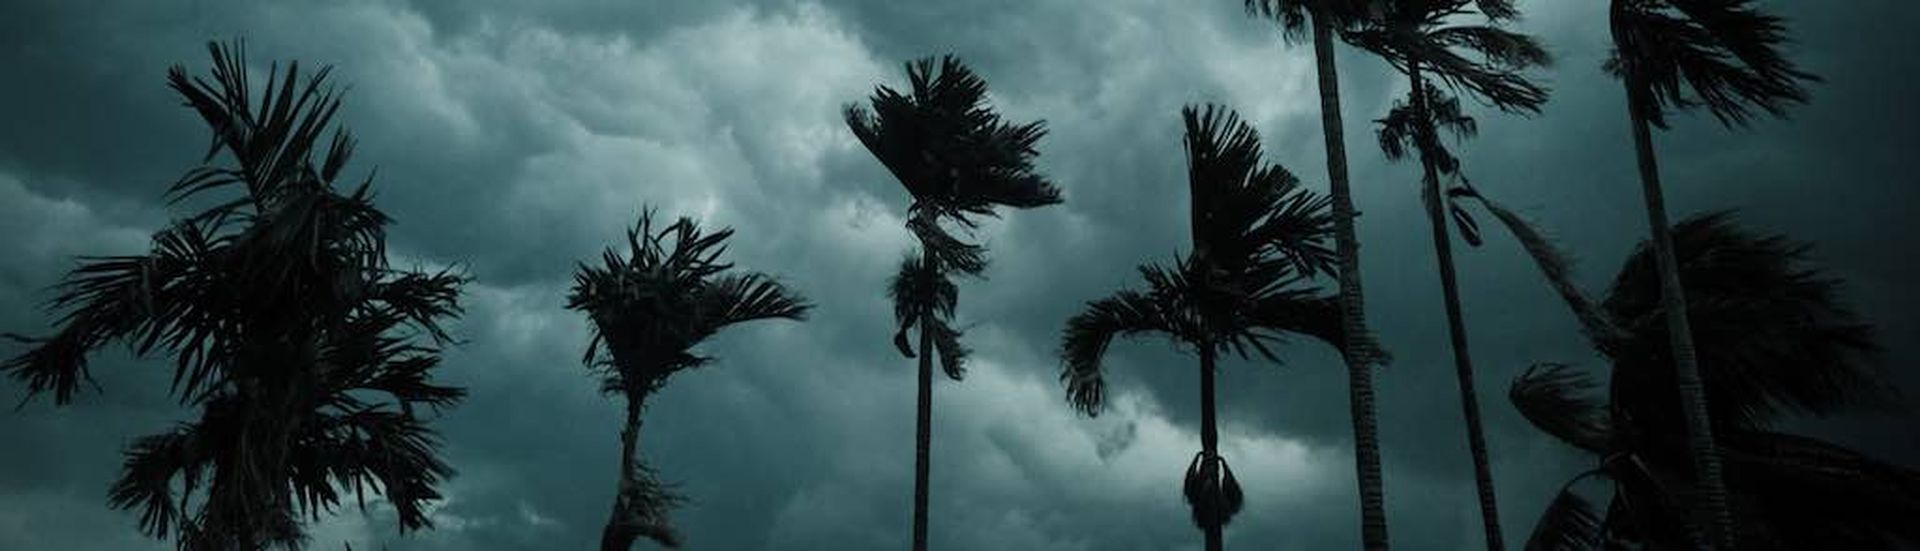 Thick dark black heavy storm clouds covered summer sunset sky horizon. Gale speed wind blowing over blurry coconut palm tree before Norwesters Kalbaishakhi Bordoisila thunderstorm torrential rain.